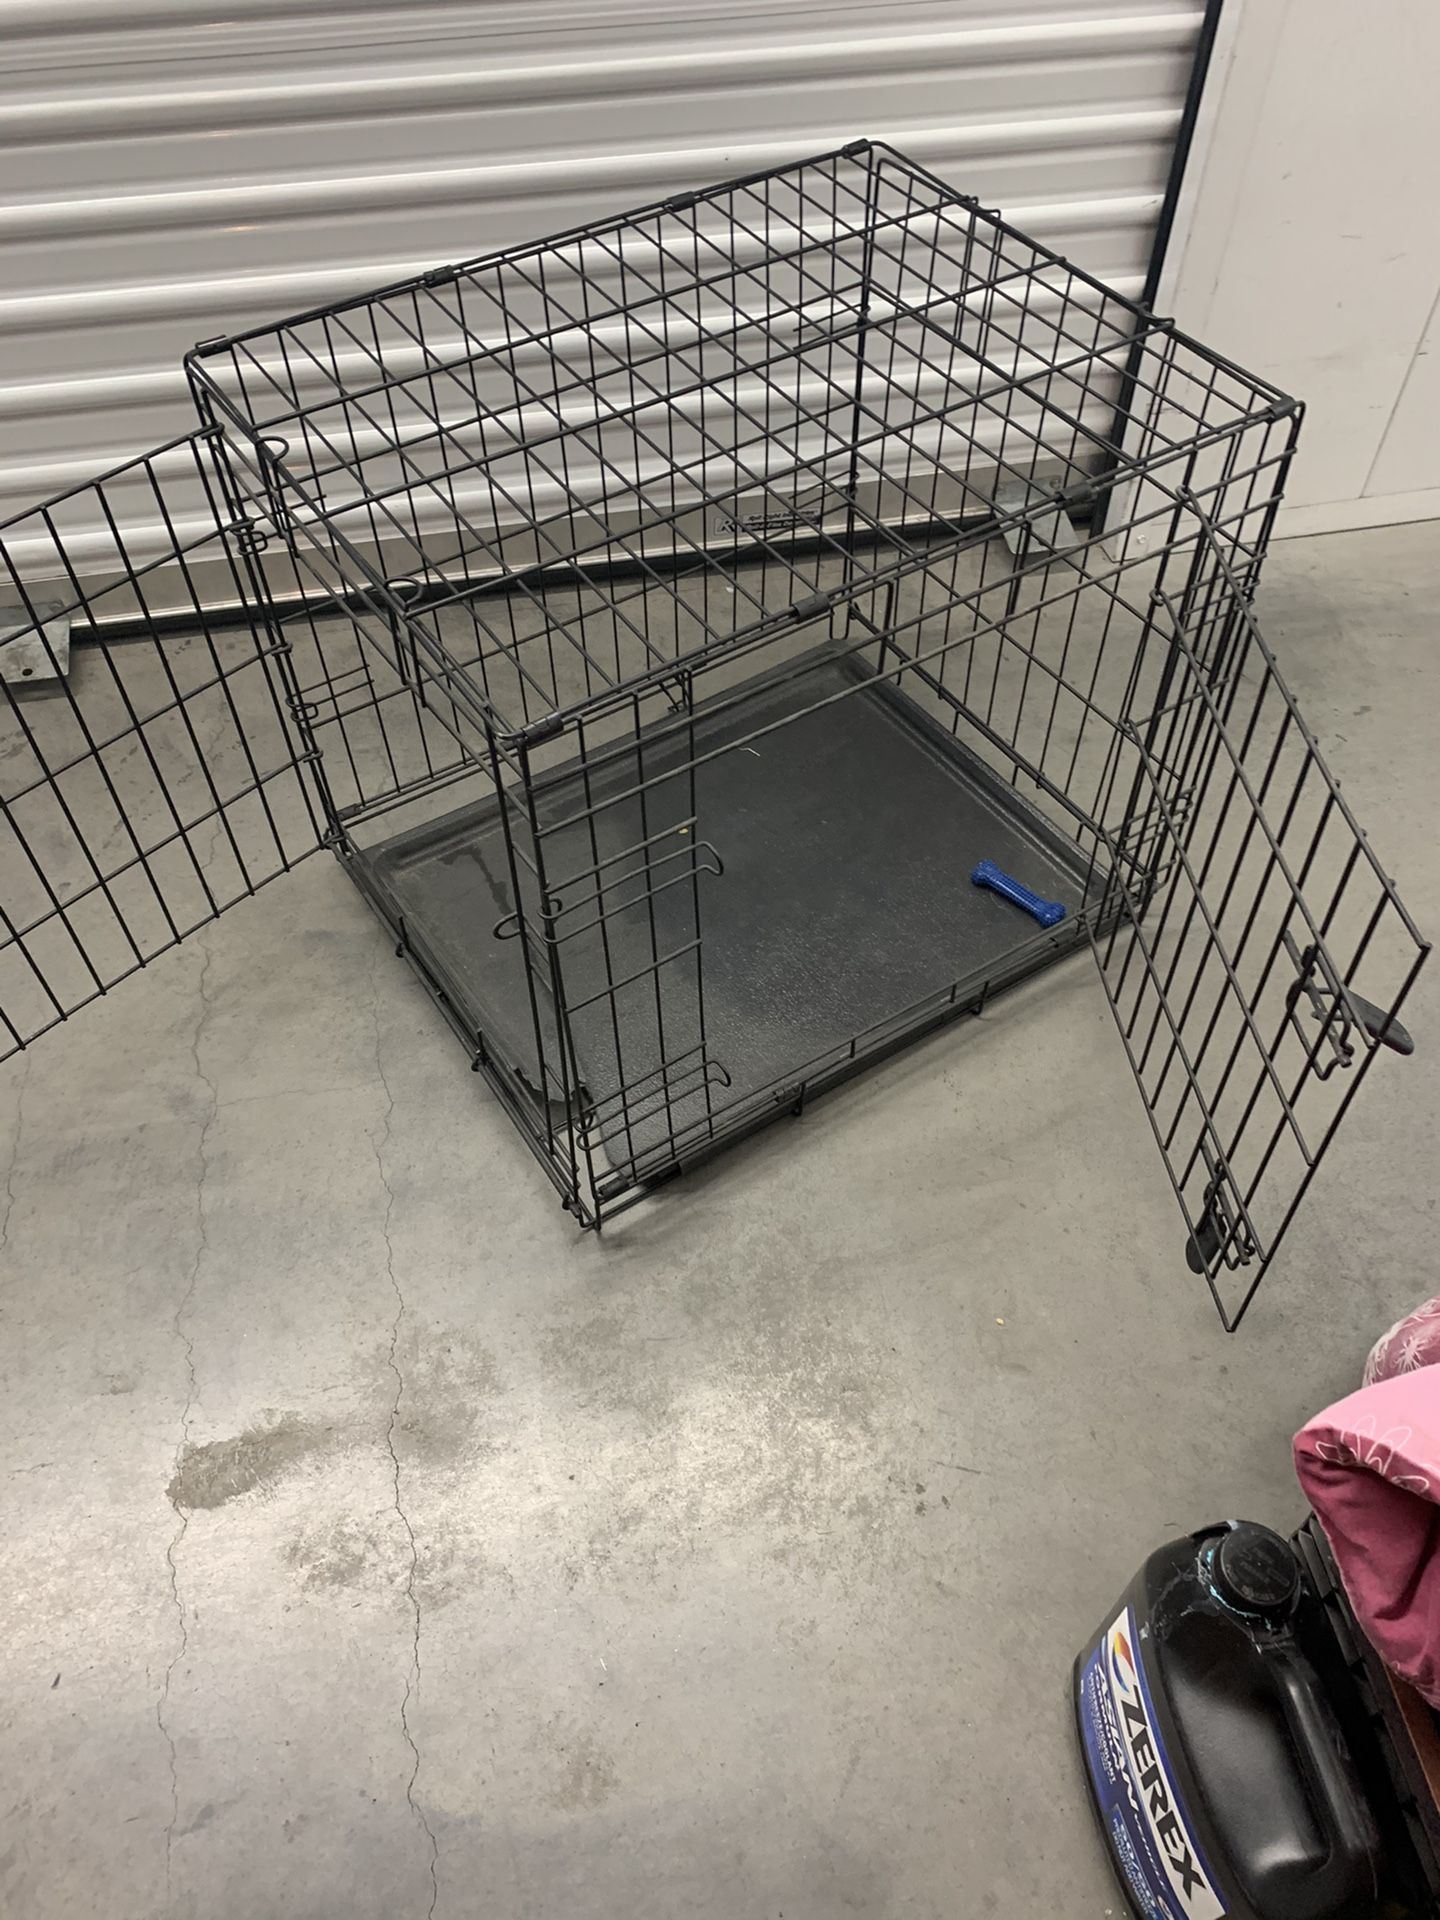 Small dog kennel